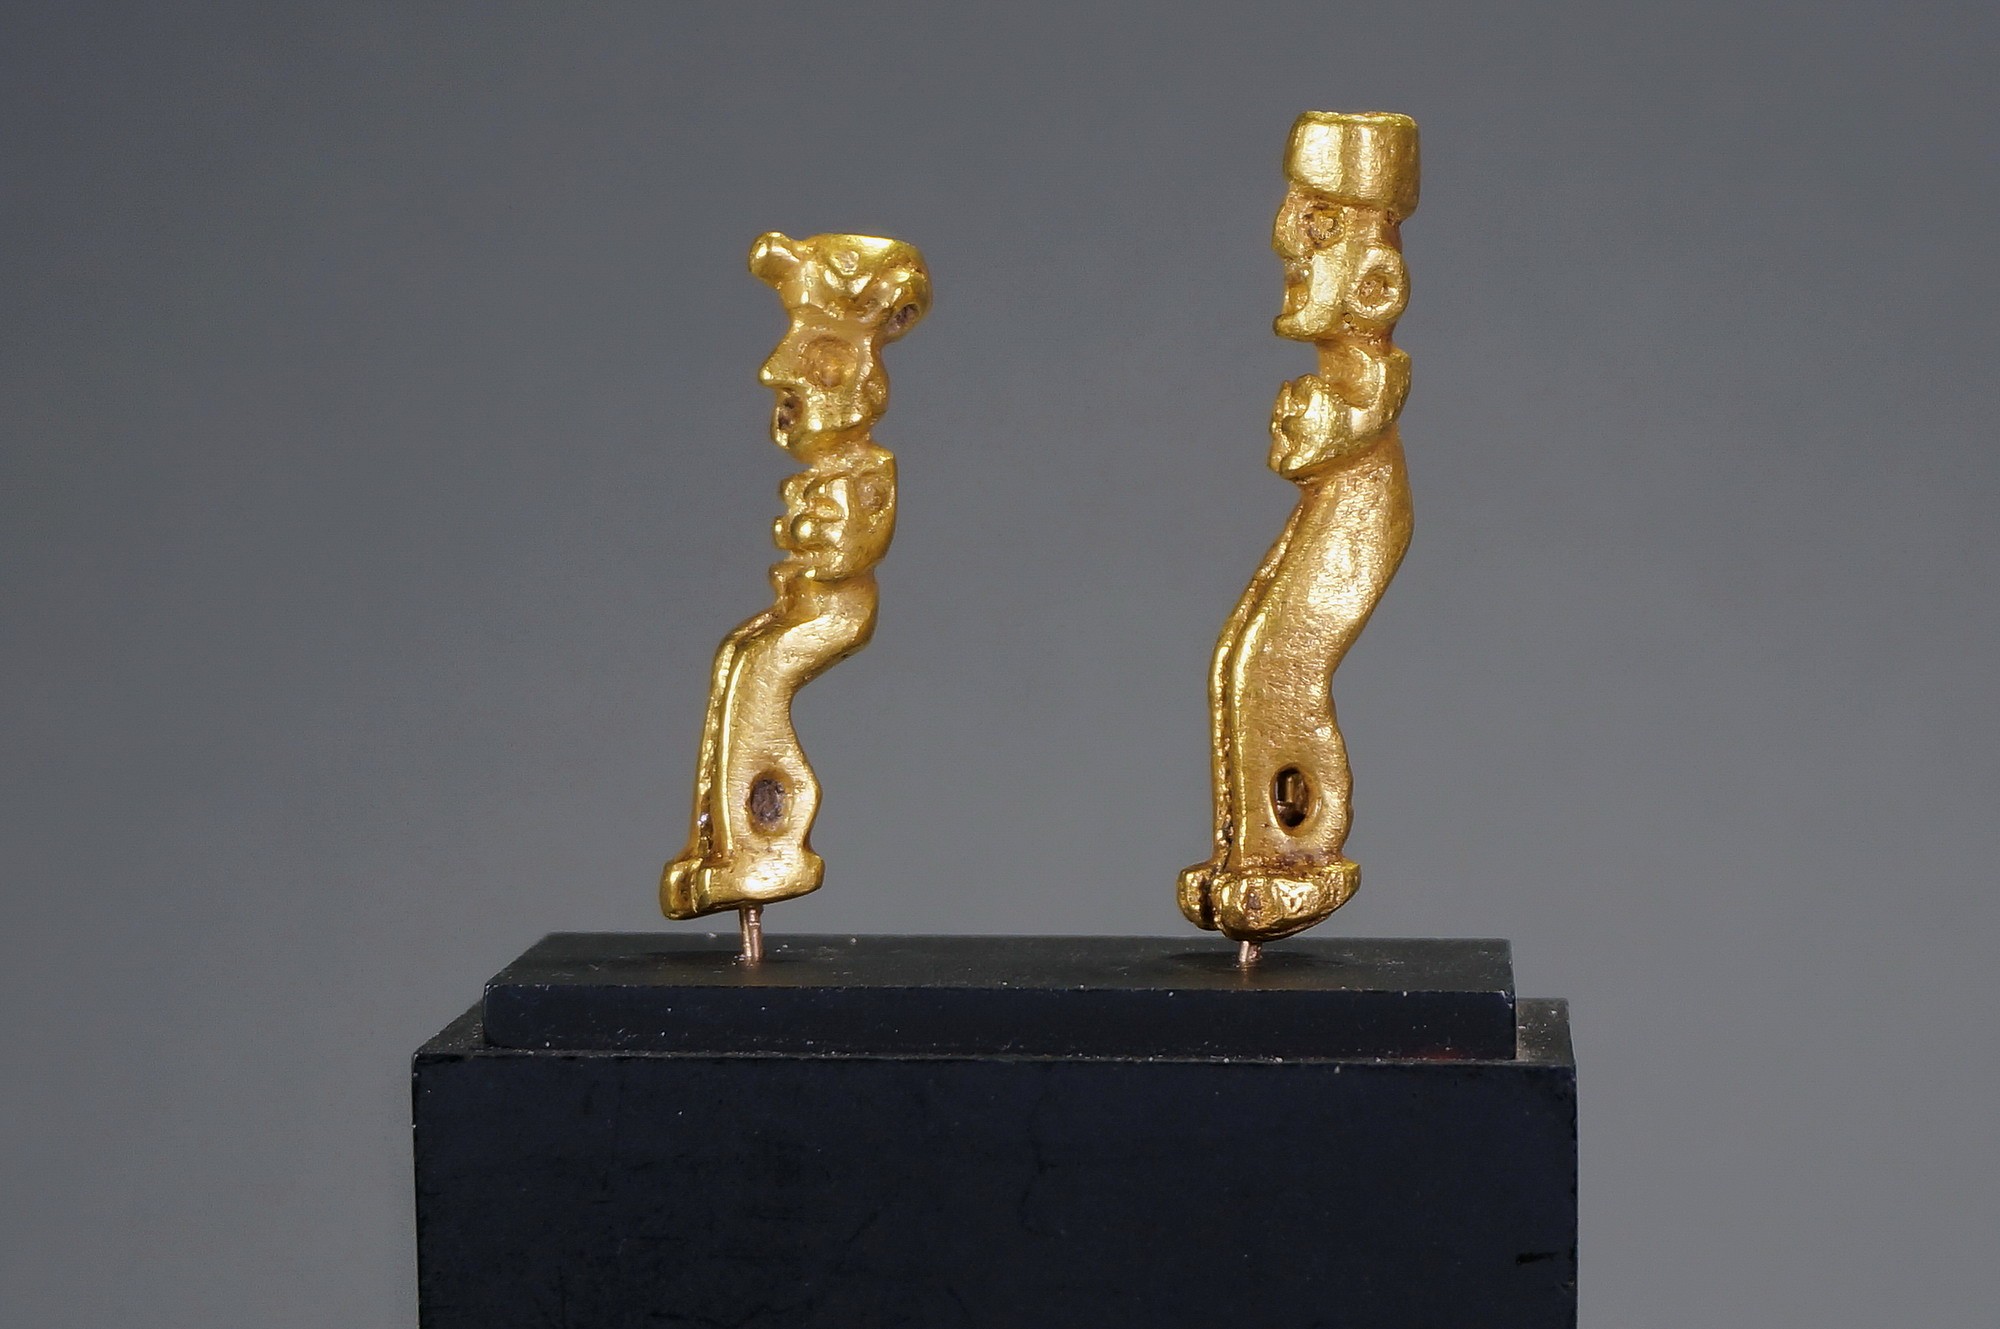 Peru, Two Inca Miniature Cast Gold Standing Figures
These two solid cast gold figures are highly unusual subjects.  Each figure has exaggerated hands and elongated legs.  Both figures have cast suspension holes above the ankles.  The top of each figure has a hollow shape that could have been used to insert feathers.  The only other example illustrated is in Oro del Antiguo Peru, lamina 210 (7 cm or 2.75").  One figure is wearing a headdress with a feline motif and the other one with a simple cylindrical shape.  Ex. New York collector, prior to 1970.
Media: Metal
Dimensions: Height:1.5" and 1.75"; Weight: 24 grams for pair.
&bull;SOLD
n7028